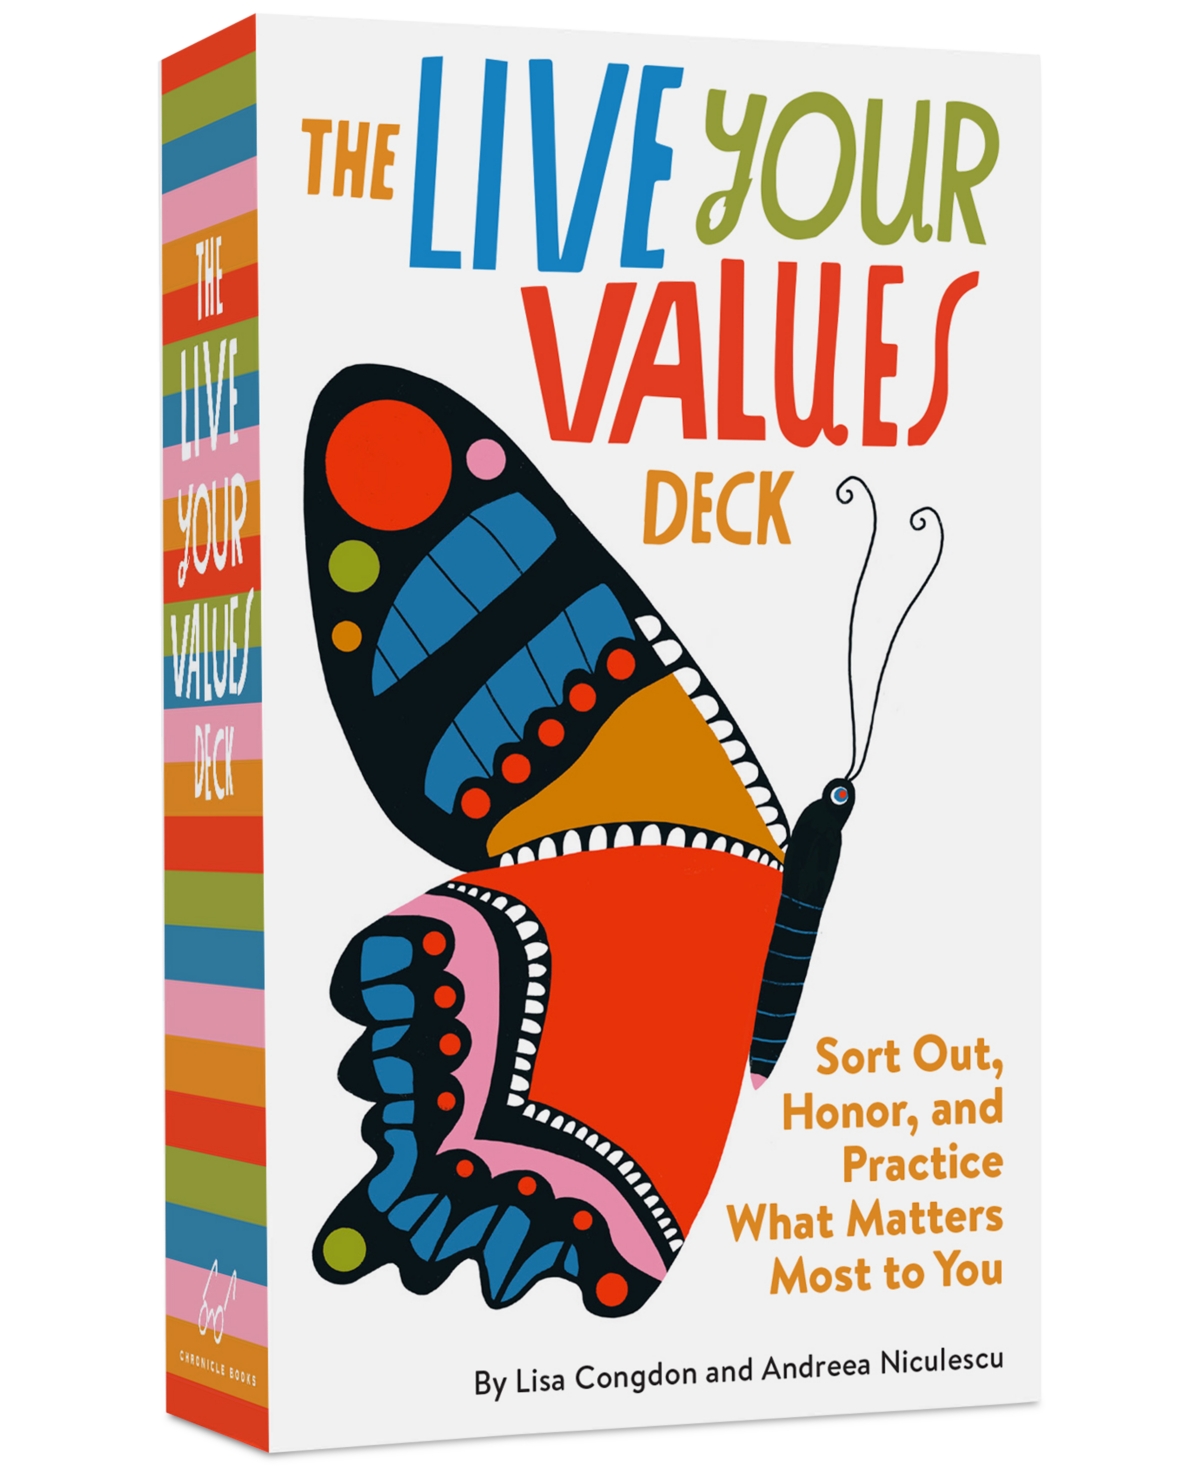 ISBN 9781797206127 product image for Chronicle Books The Live Your Values Deck | upcitemdb.com